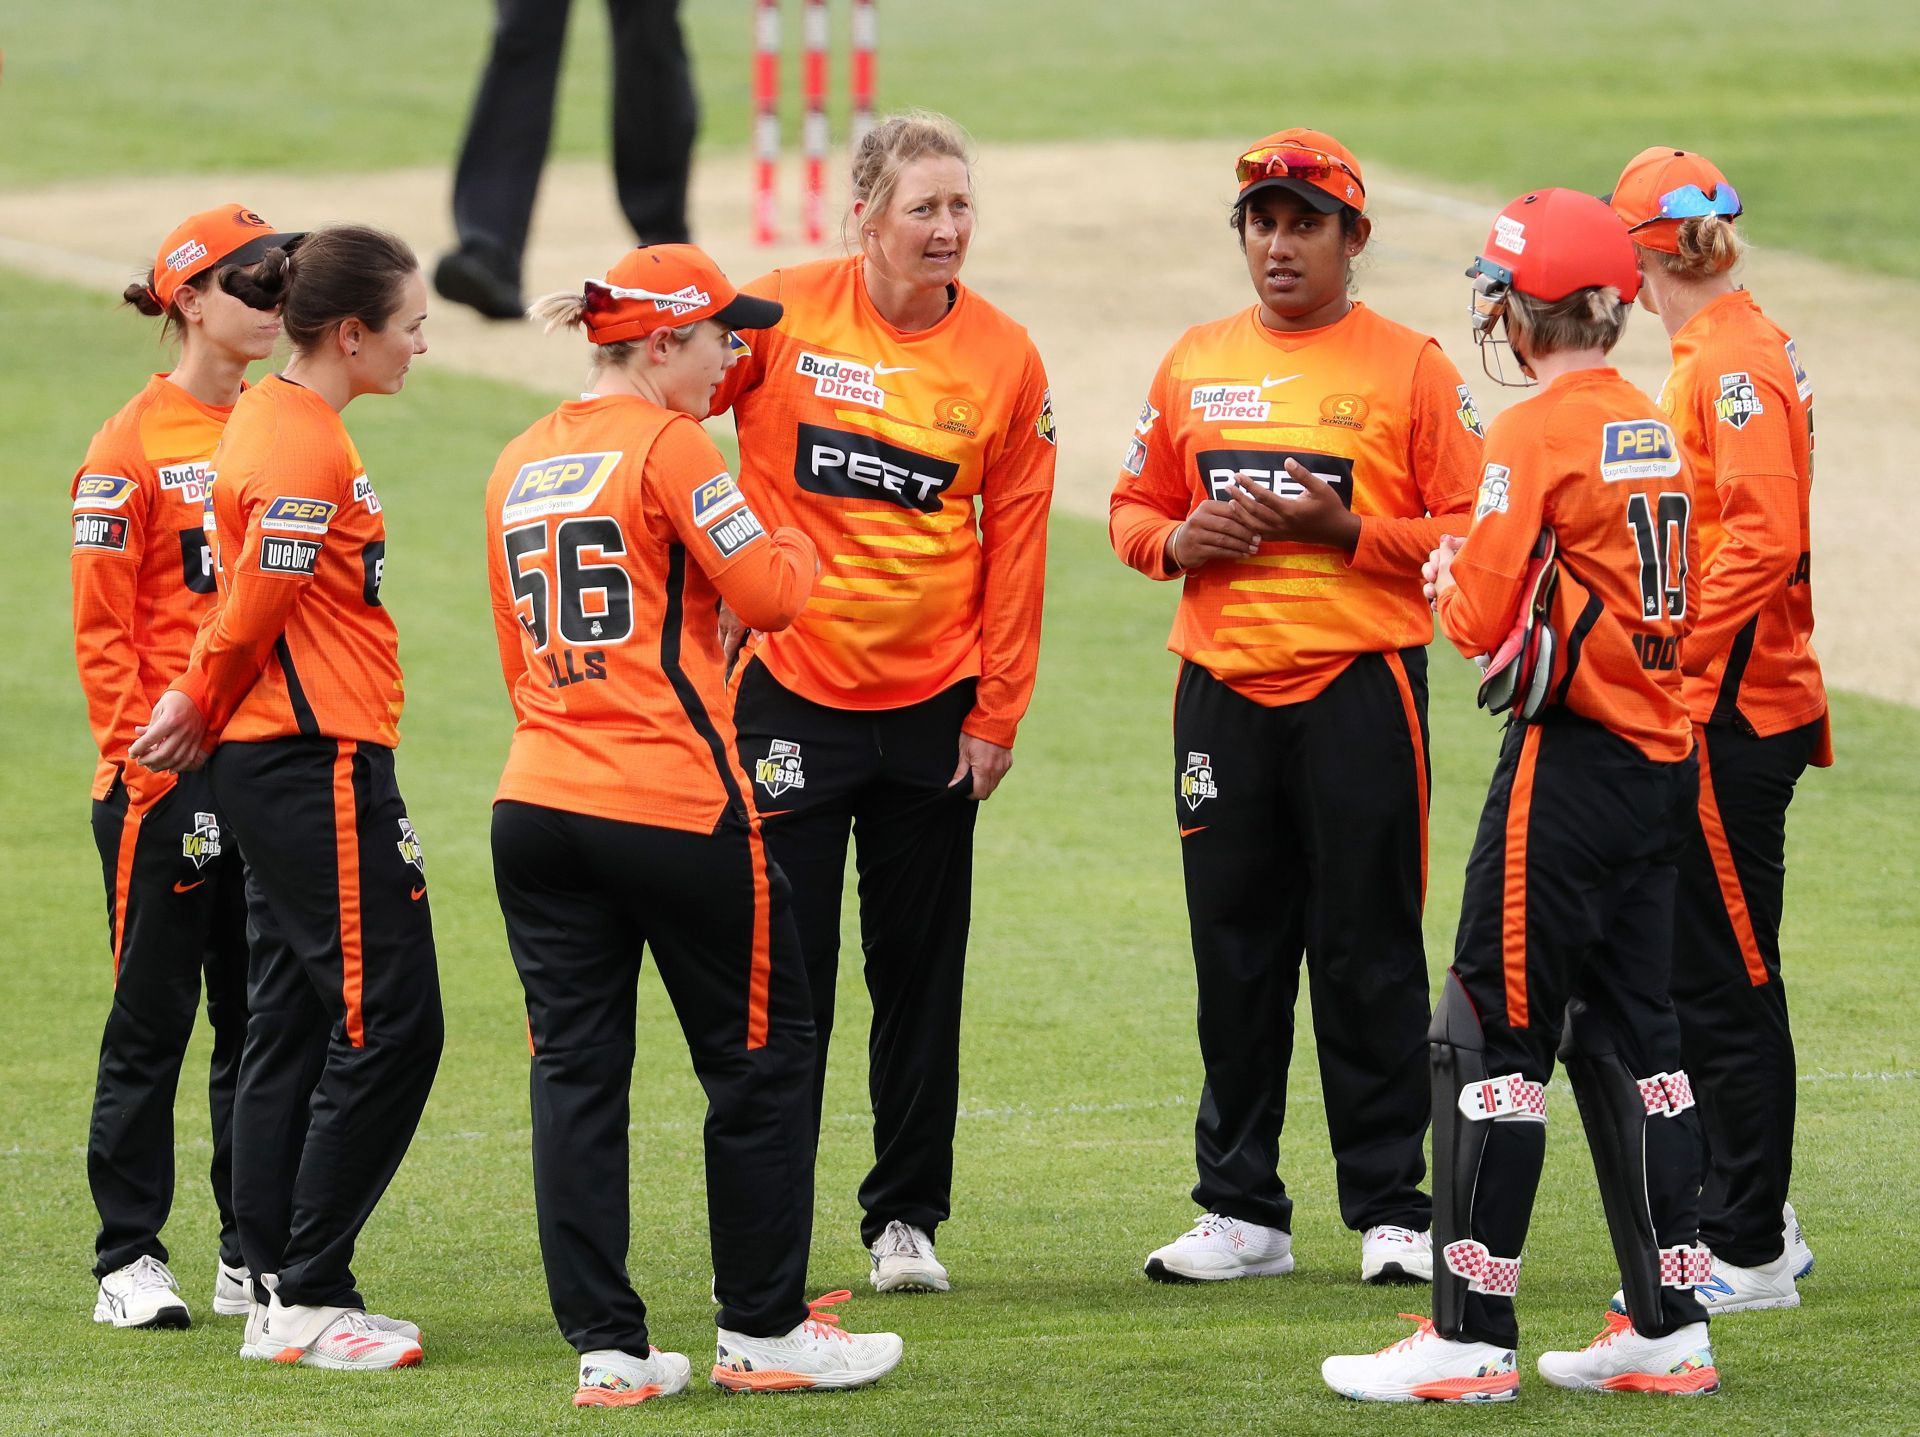 The Perth Scorchers will be eyeing a win in this contest.